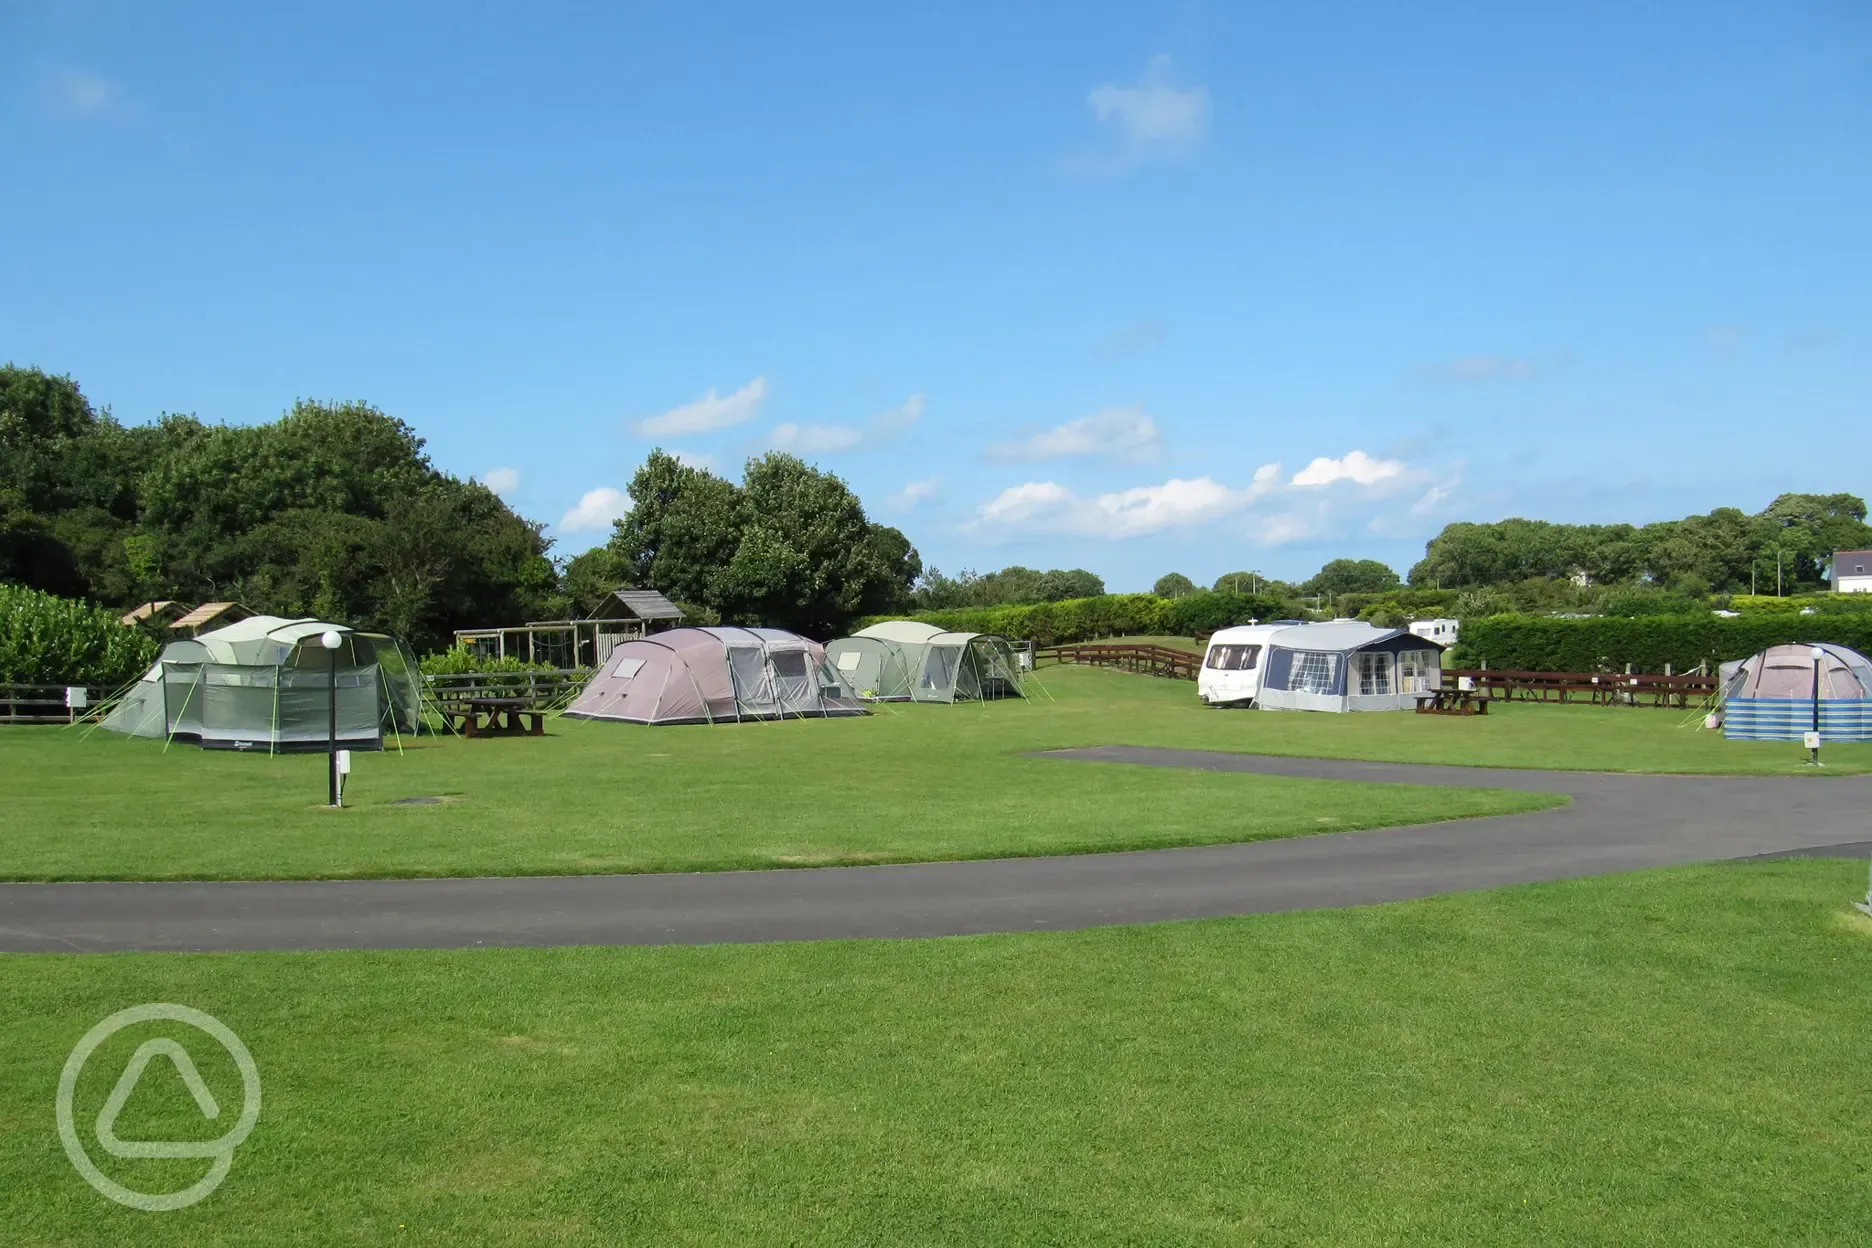 Camping field with tents and caravans 